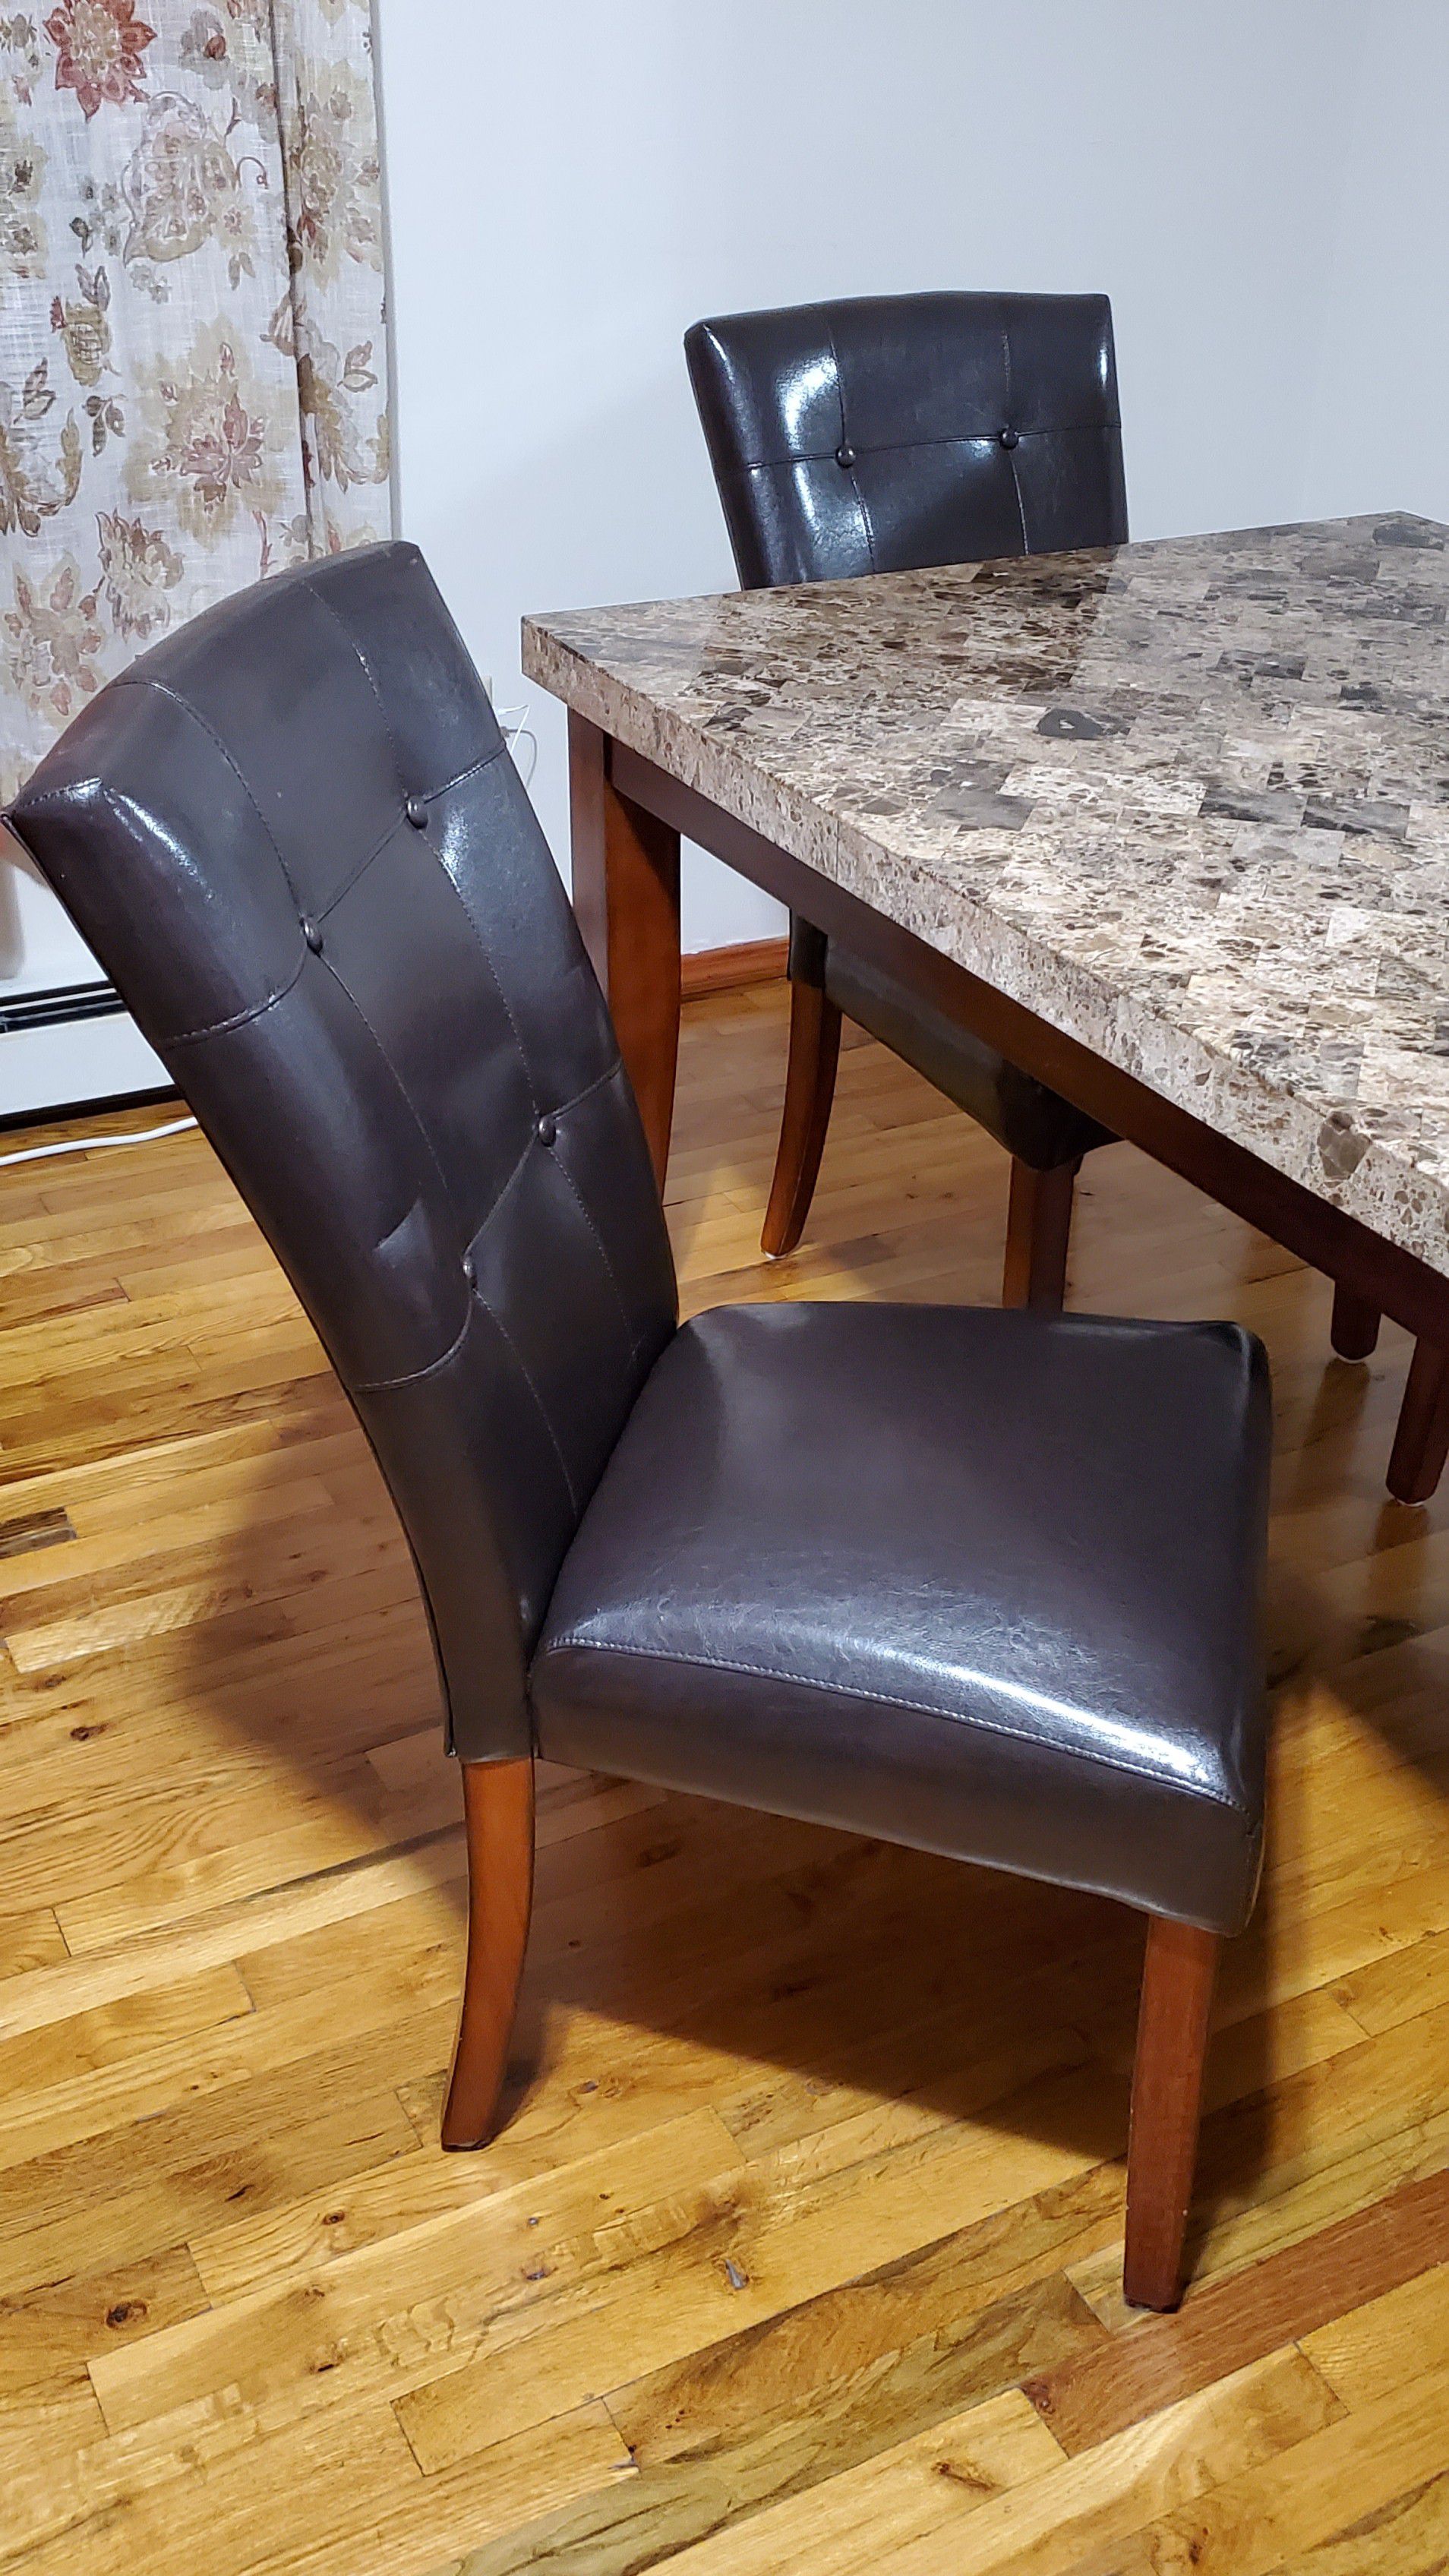 Marble Top Table With 4 Chairs. Width 70", Dedth: 42", High: 31" Condition: Great